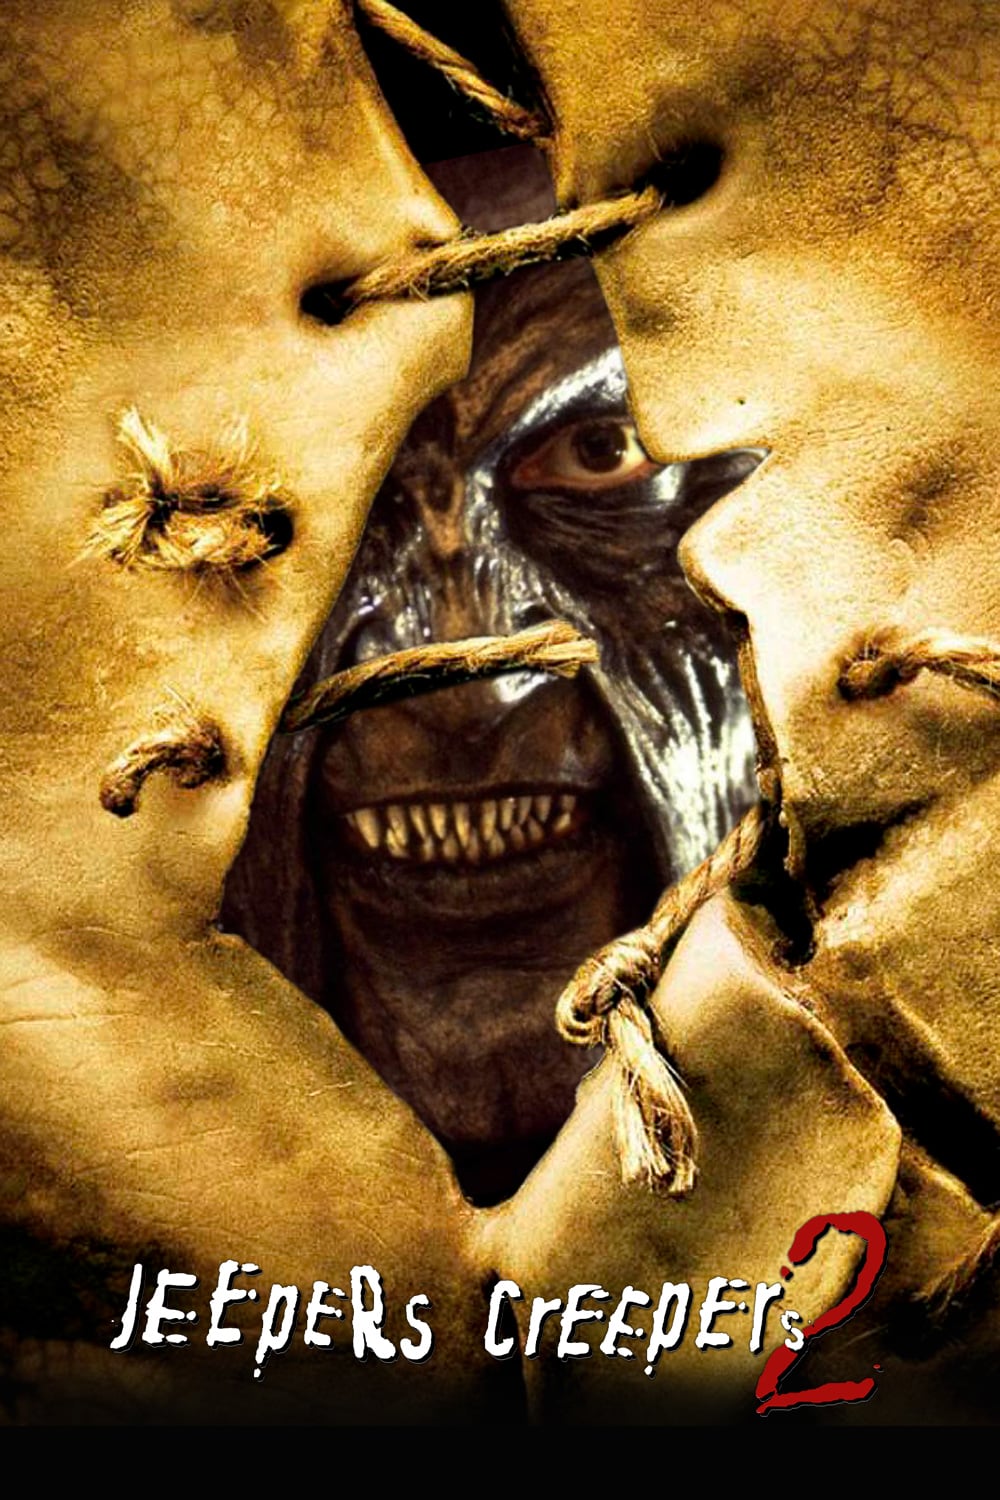 Plakat von "Jeepers Creepers 2"